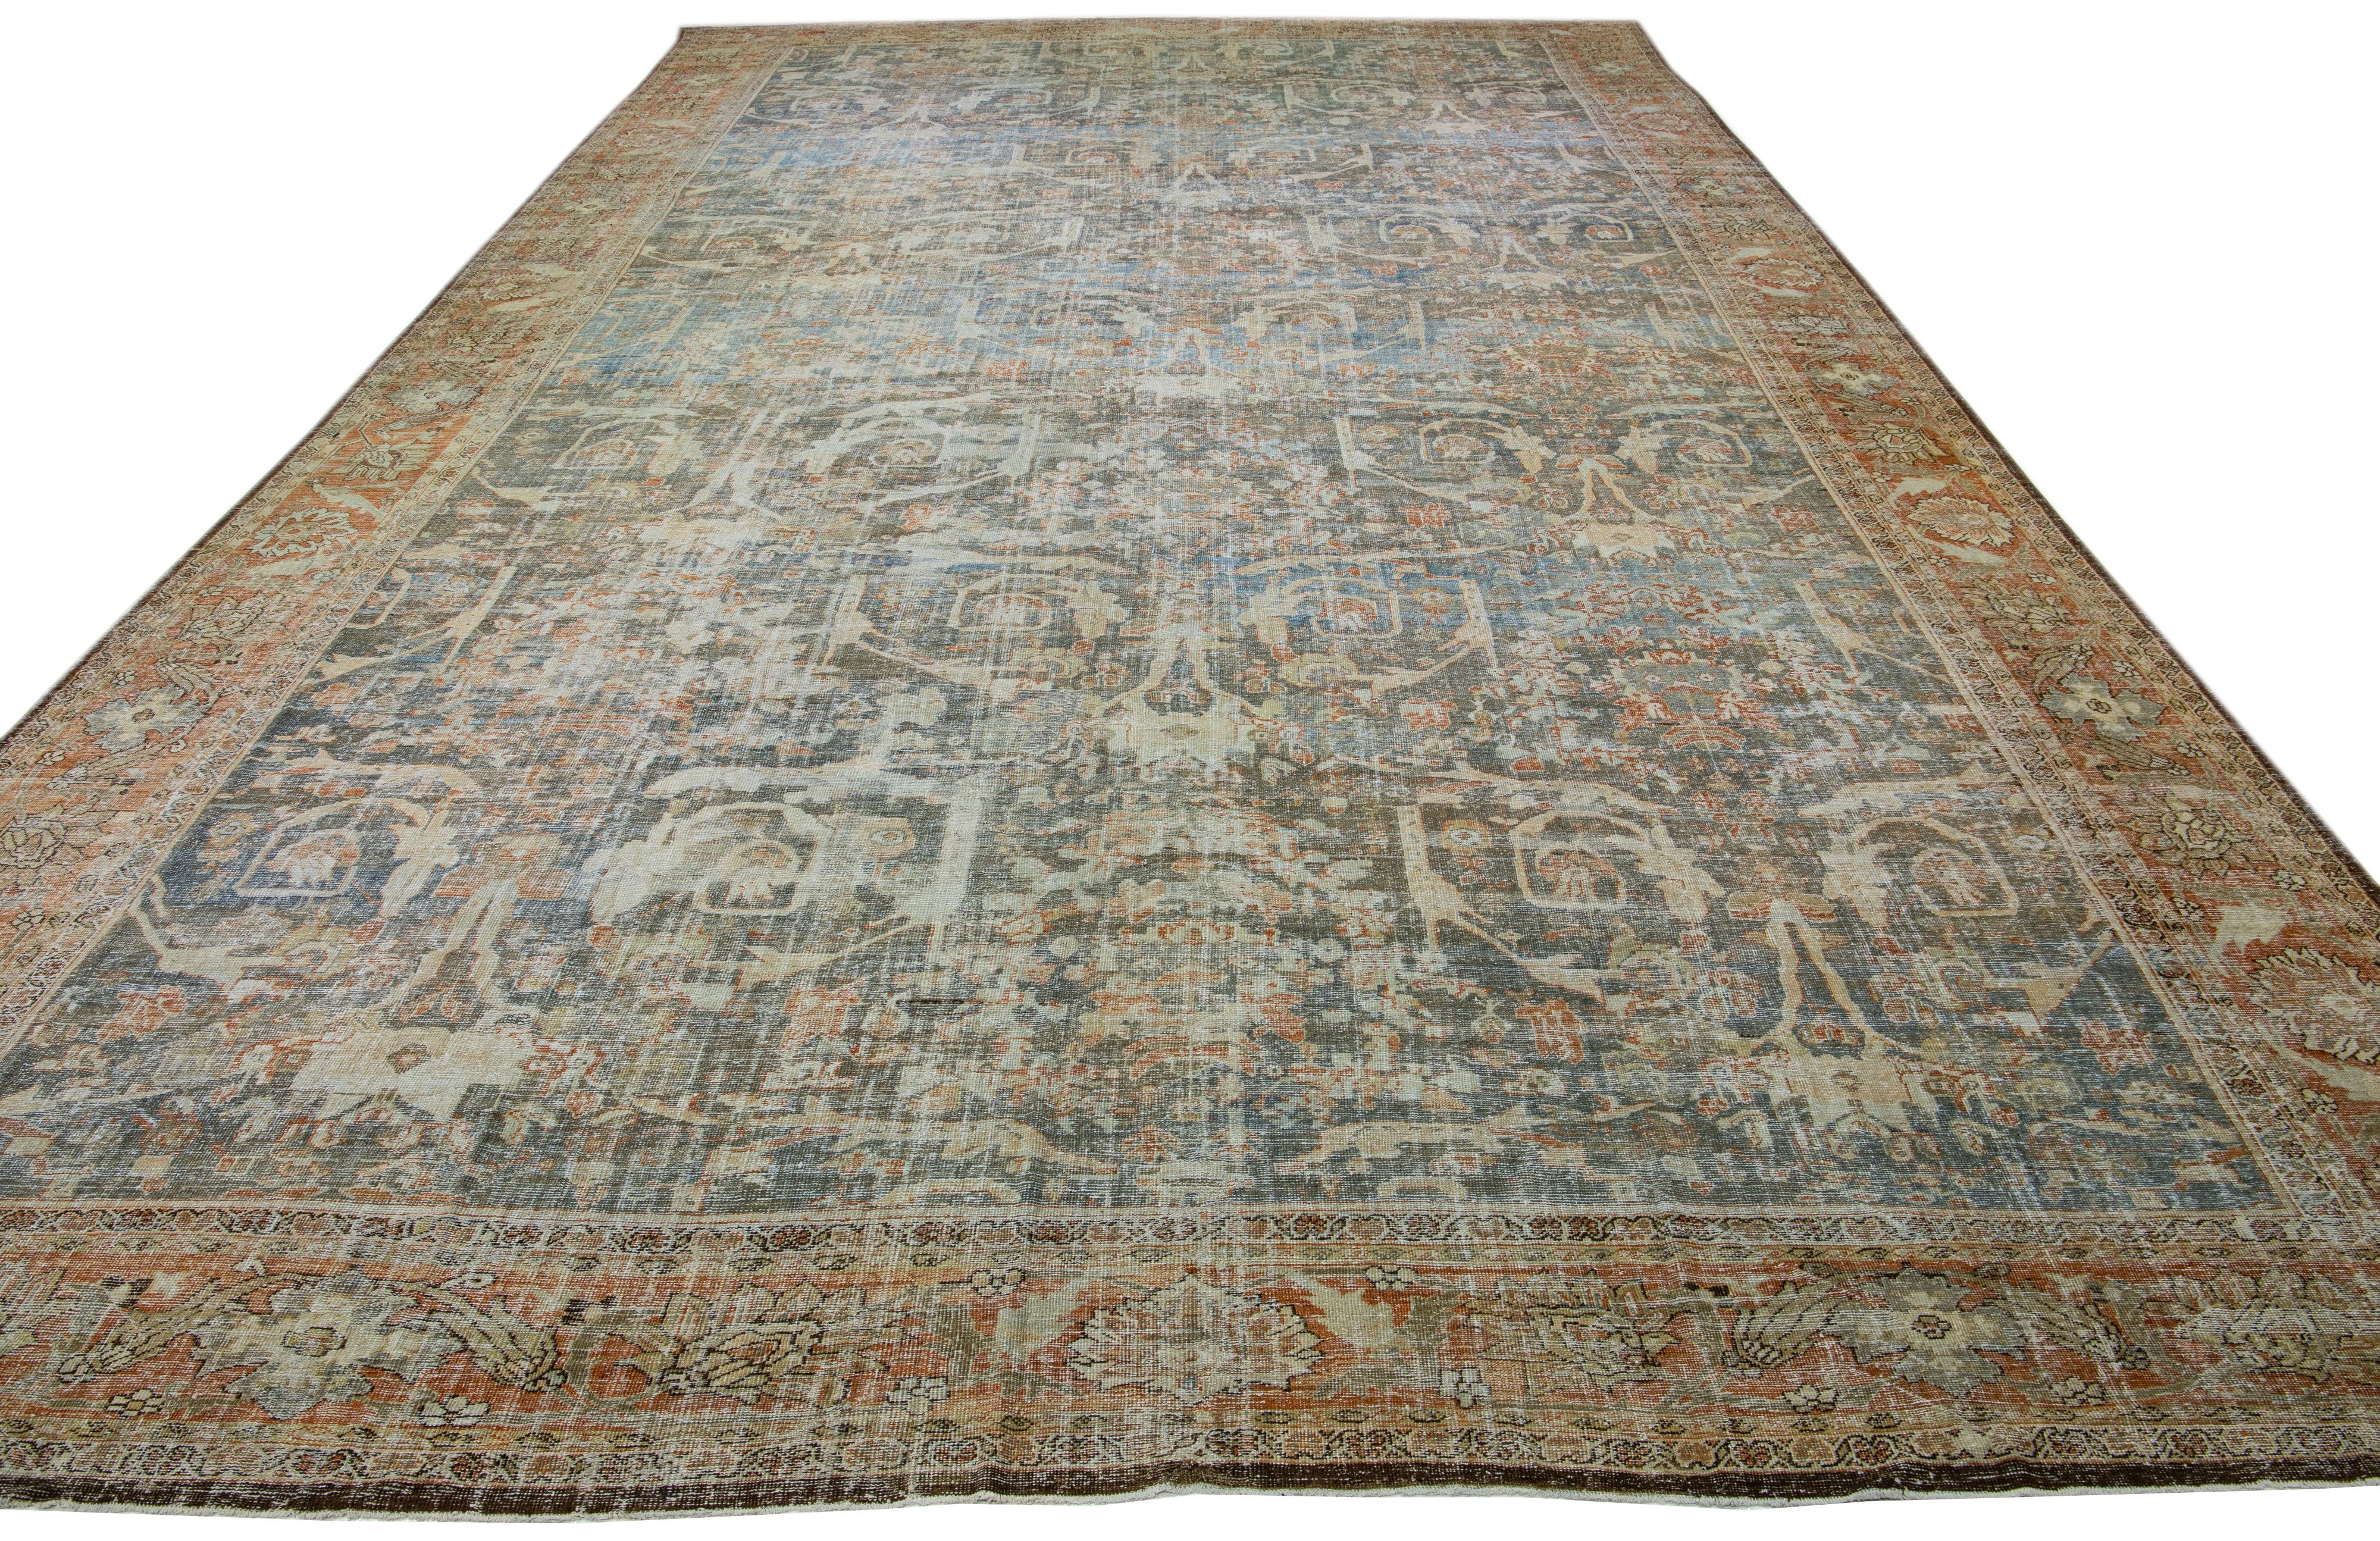 A stunning antique mahal wool rug, exquisitely hand knotted and endowed with a mesmerizing blue-gray color field. This Persian masterpiece showcases a terracotta-designed frame and beige accents that encases an all-over floral pattern.

This rug